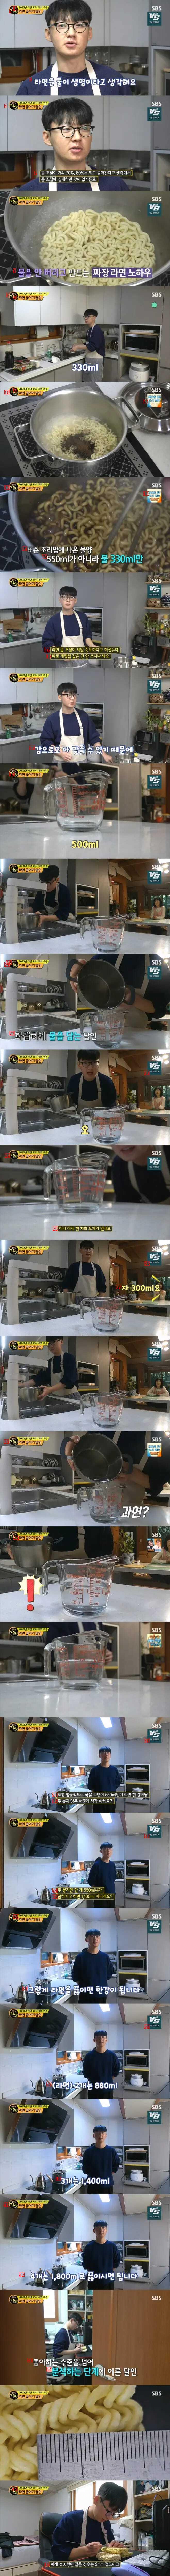 The master of cooking ramen who won the 2023 Ramen Cooking Contest